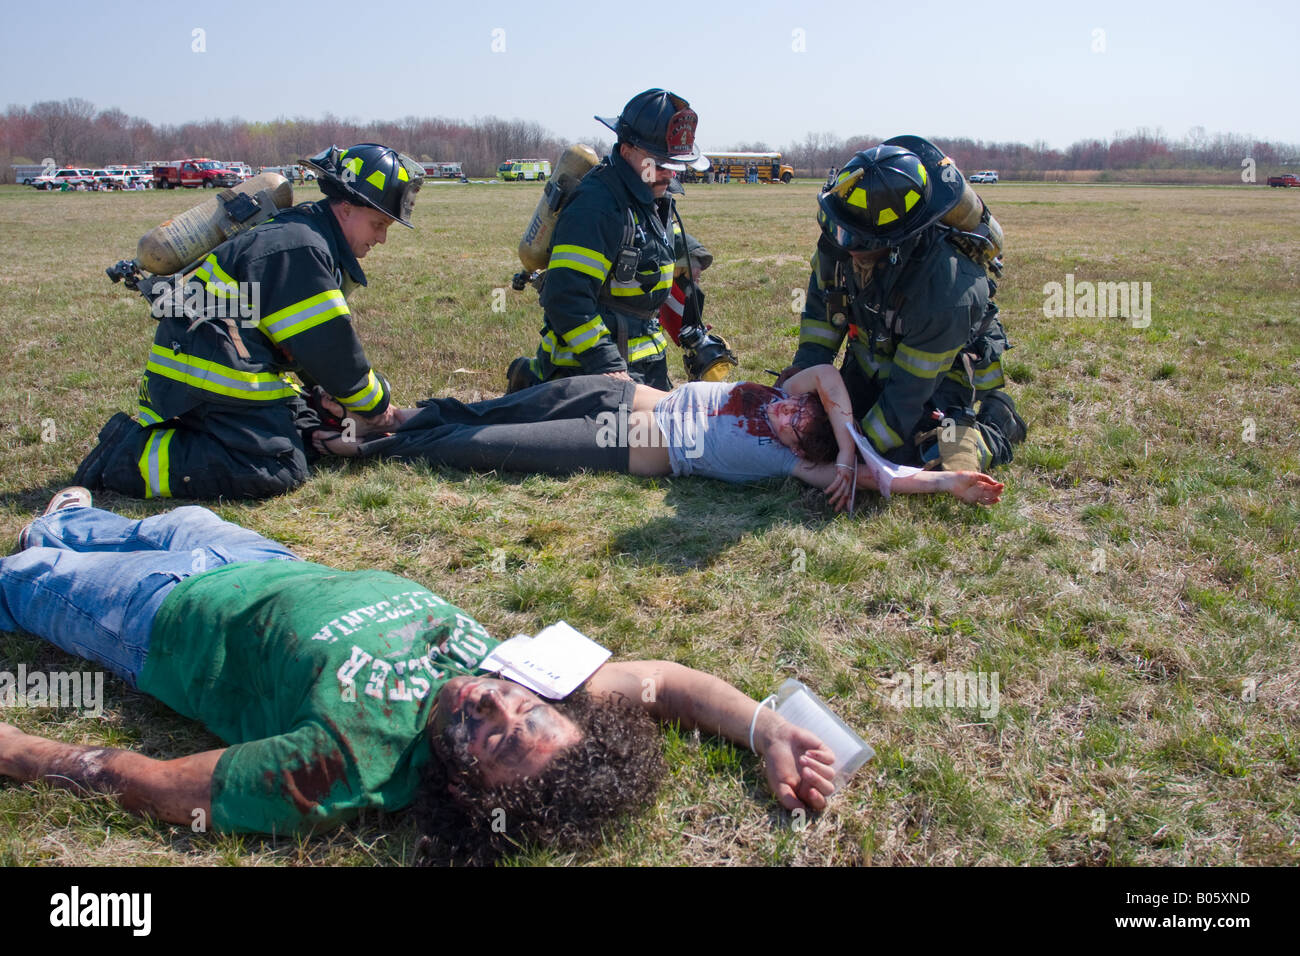 Firefighters from the New Haven Fire department tend to 'Injured' during a mock plane crash drill at Tweed New Haven Airport. Stock Photo